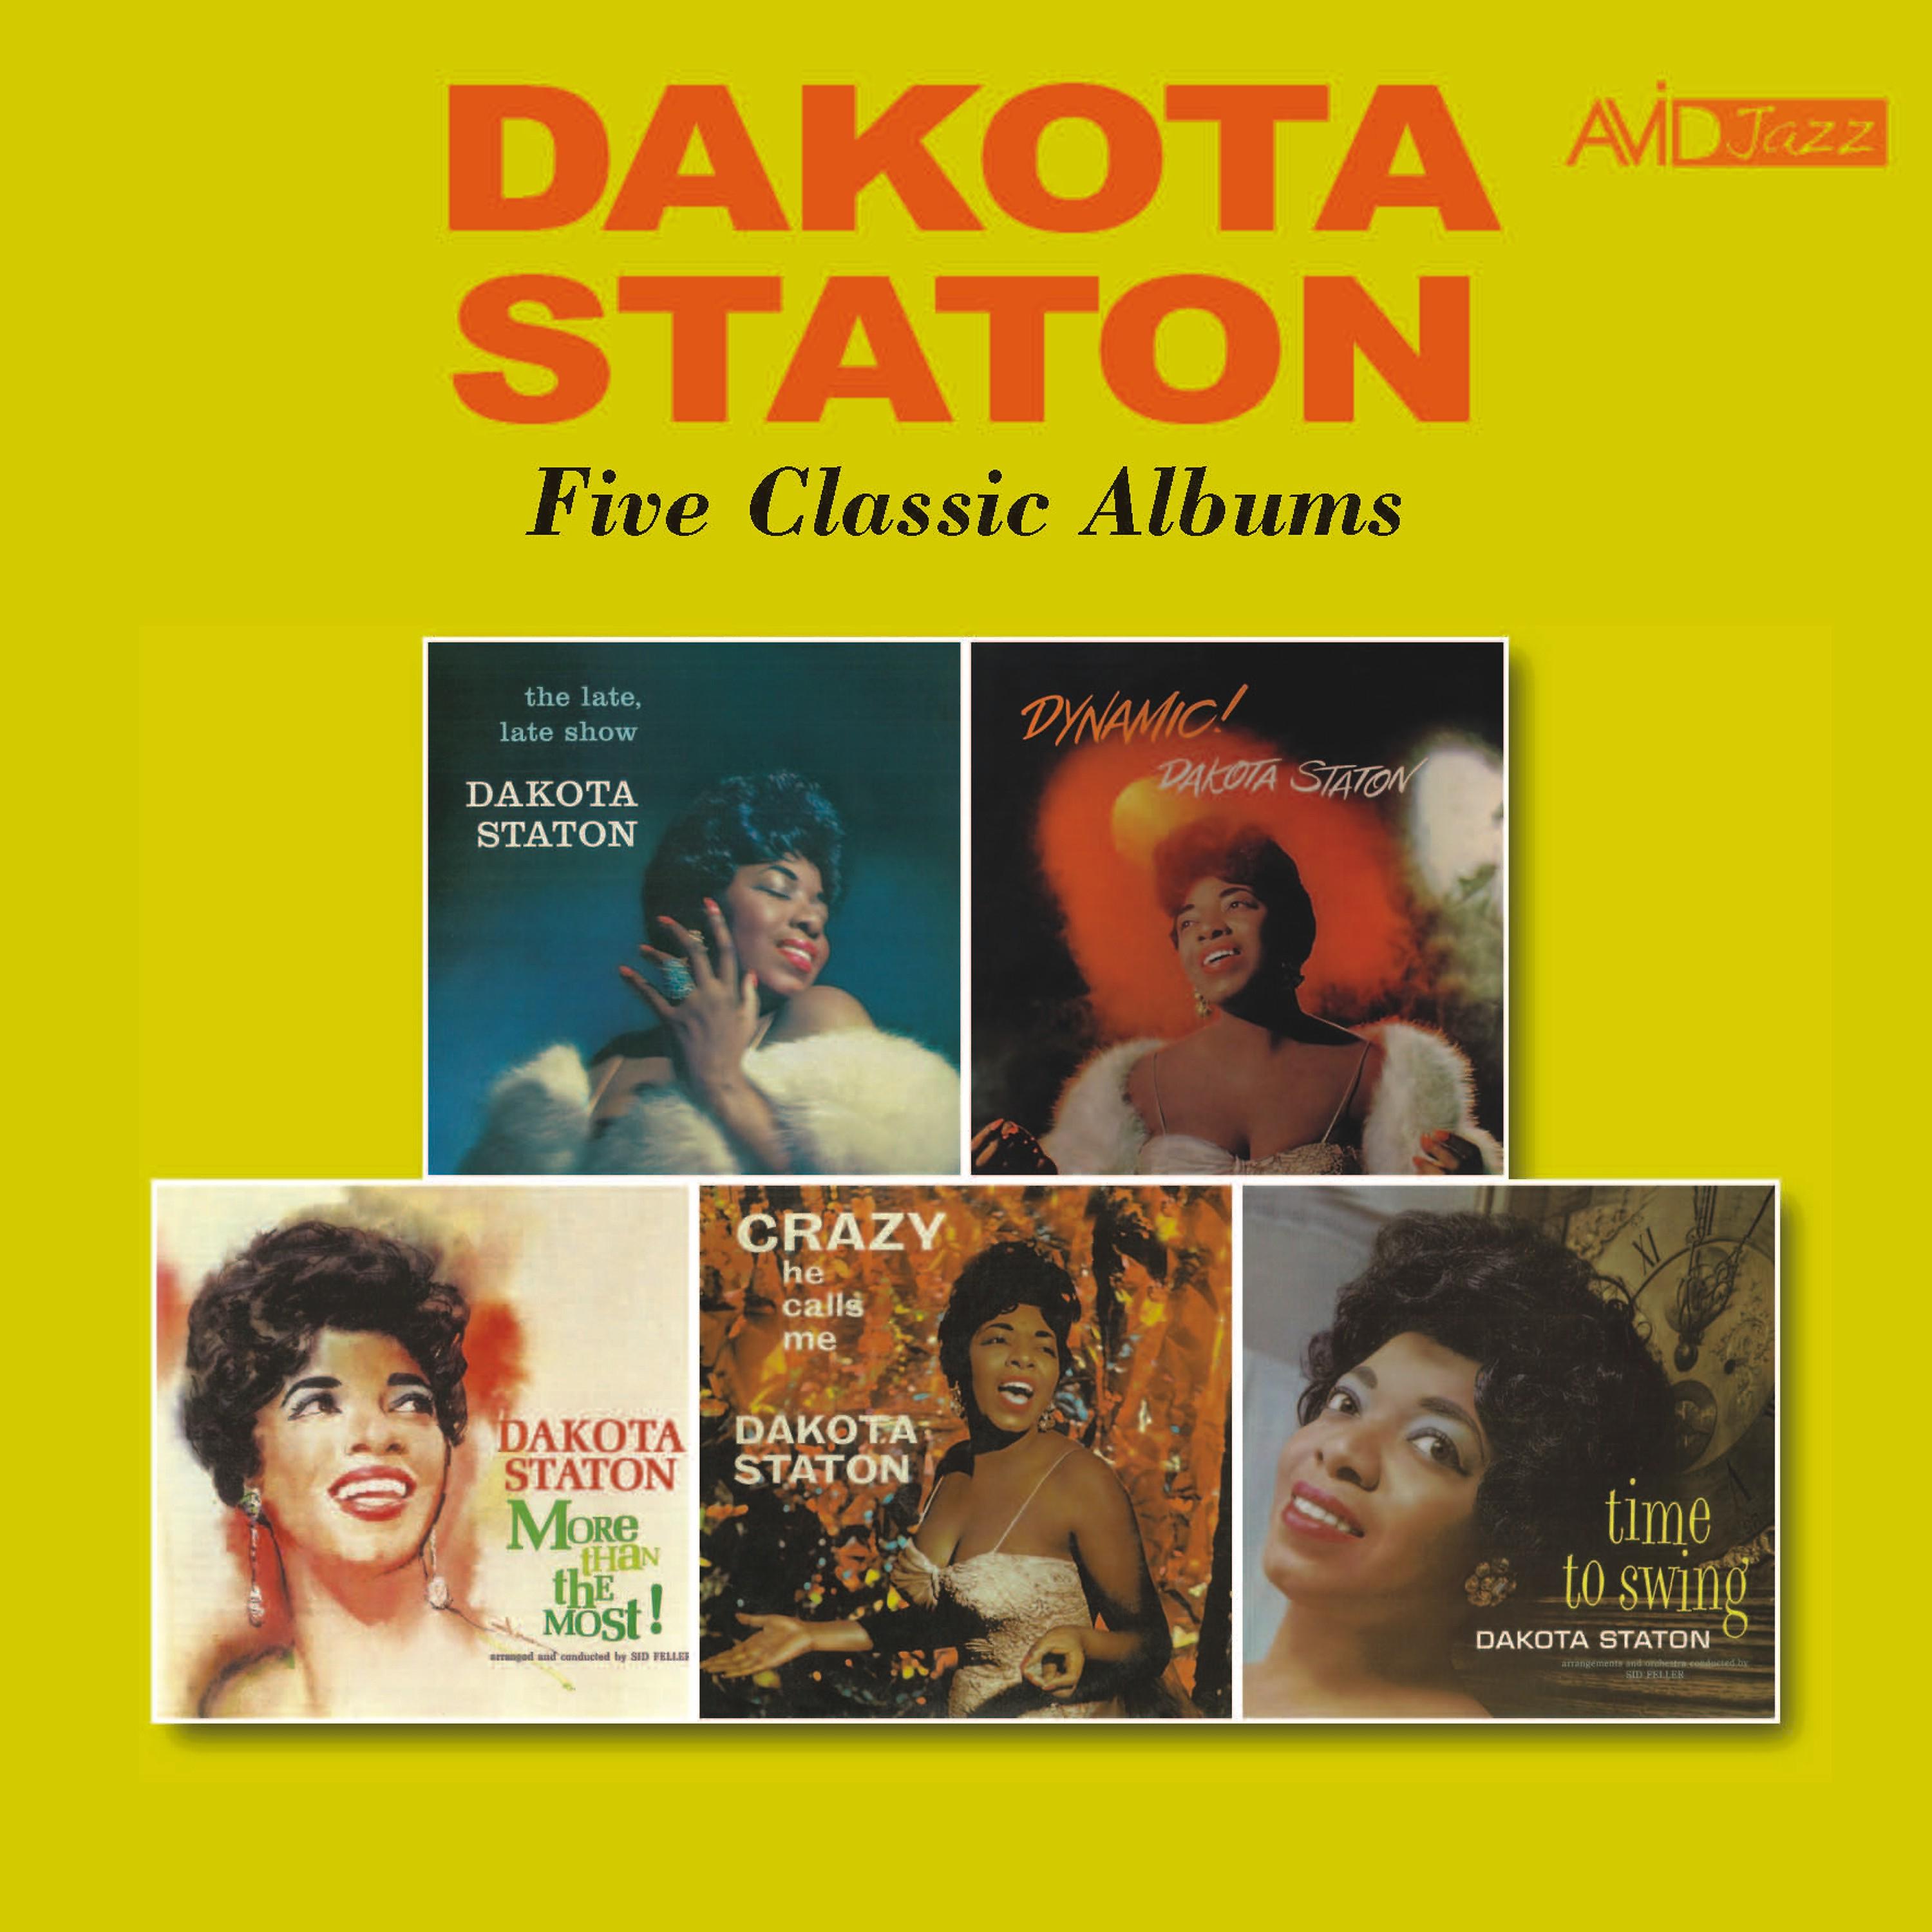 Постер альбома Five Classic Albums (The Late Late Show / Dynamic! / More Than the Most! / Crazy He Calls Me / Time to Swing) [Remastered]